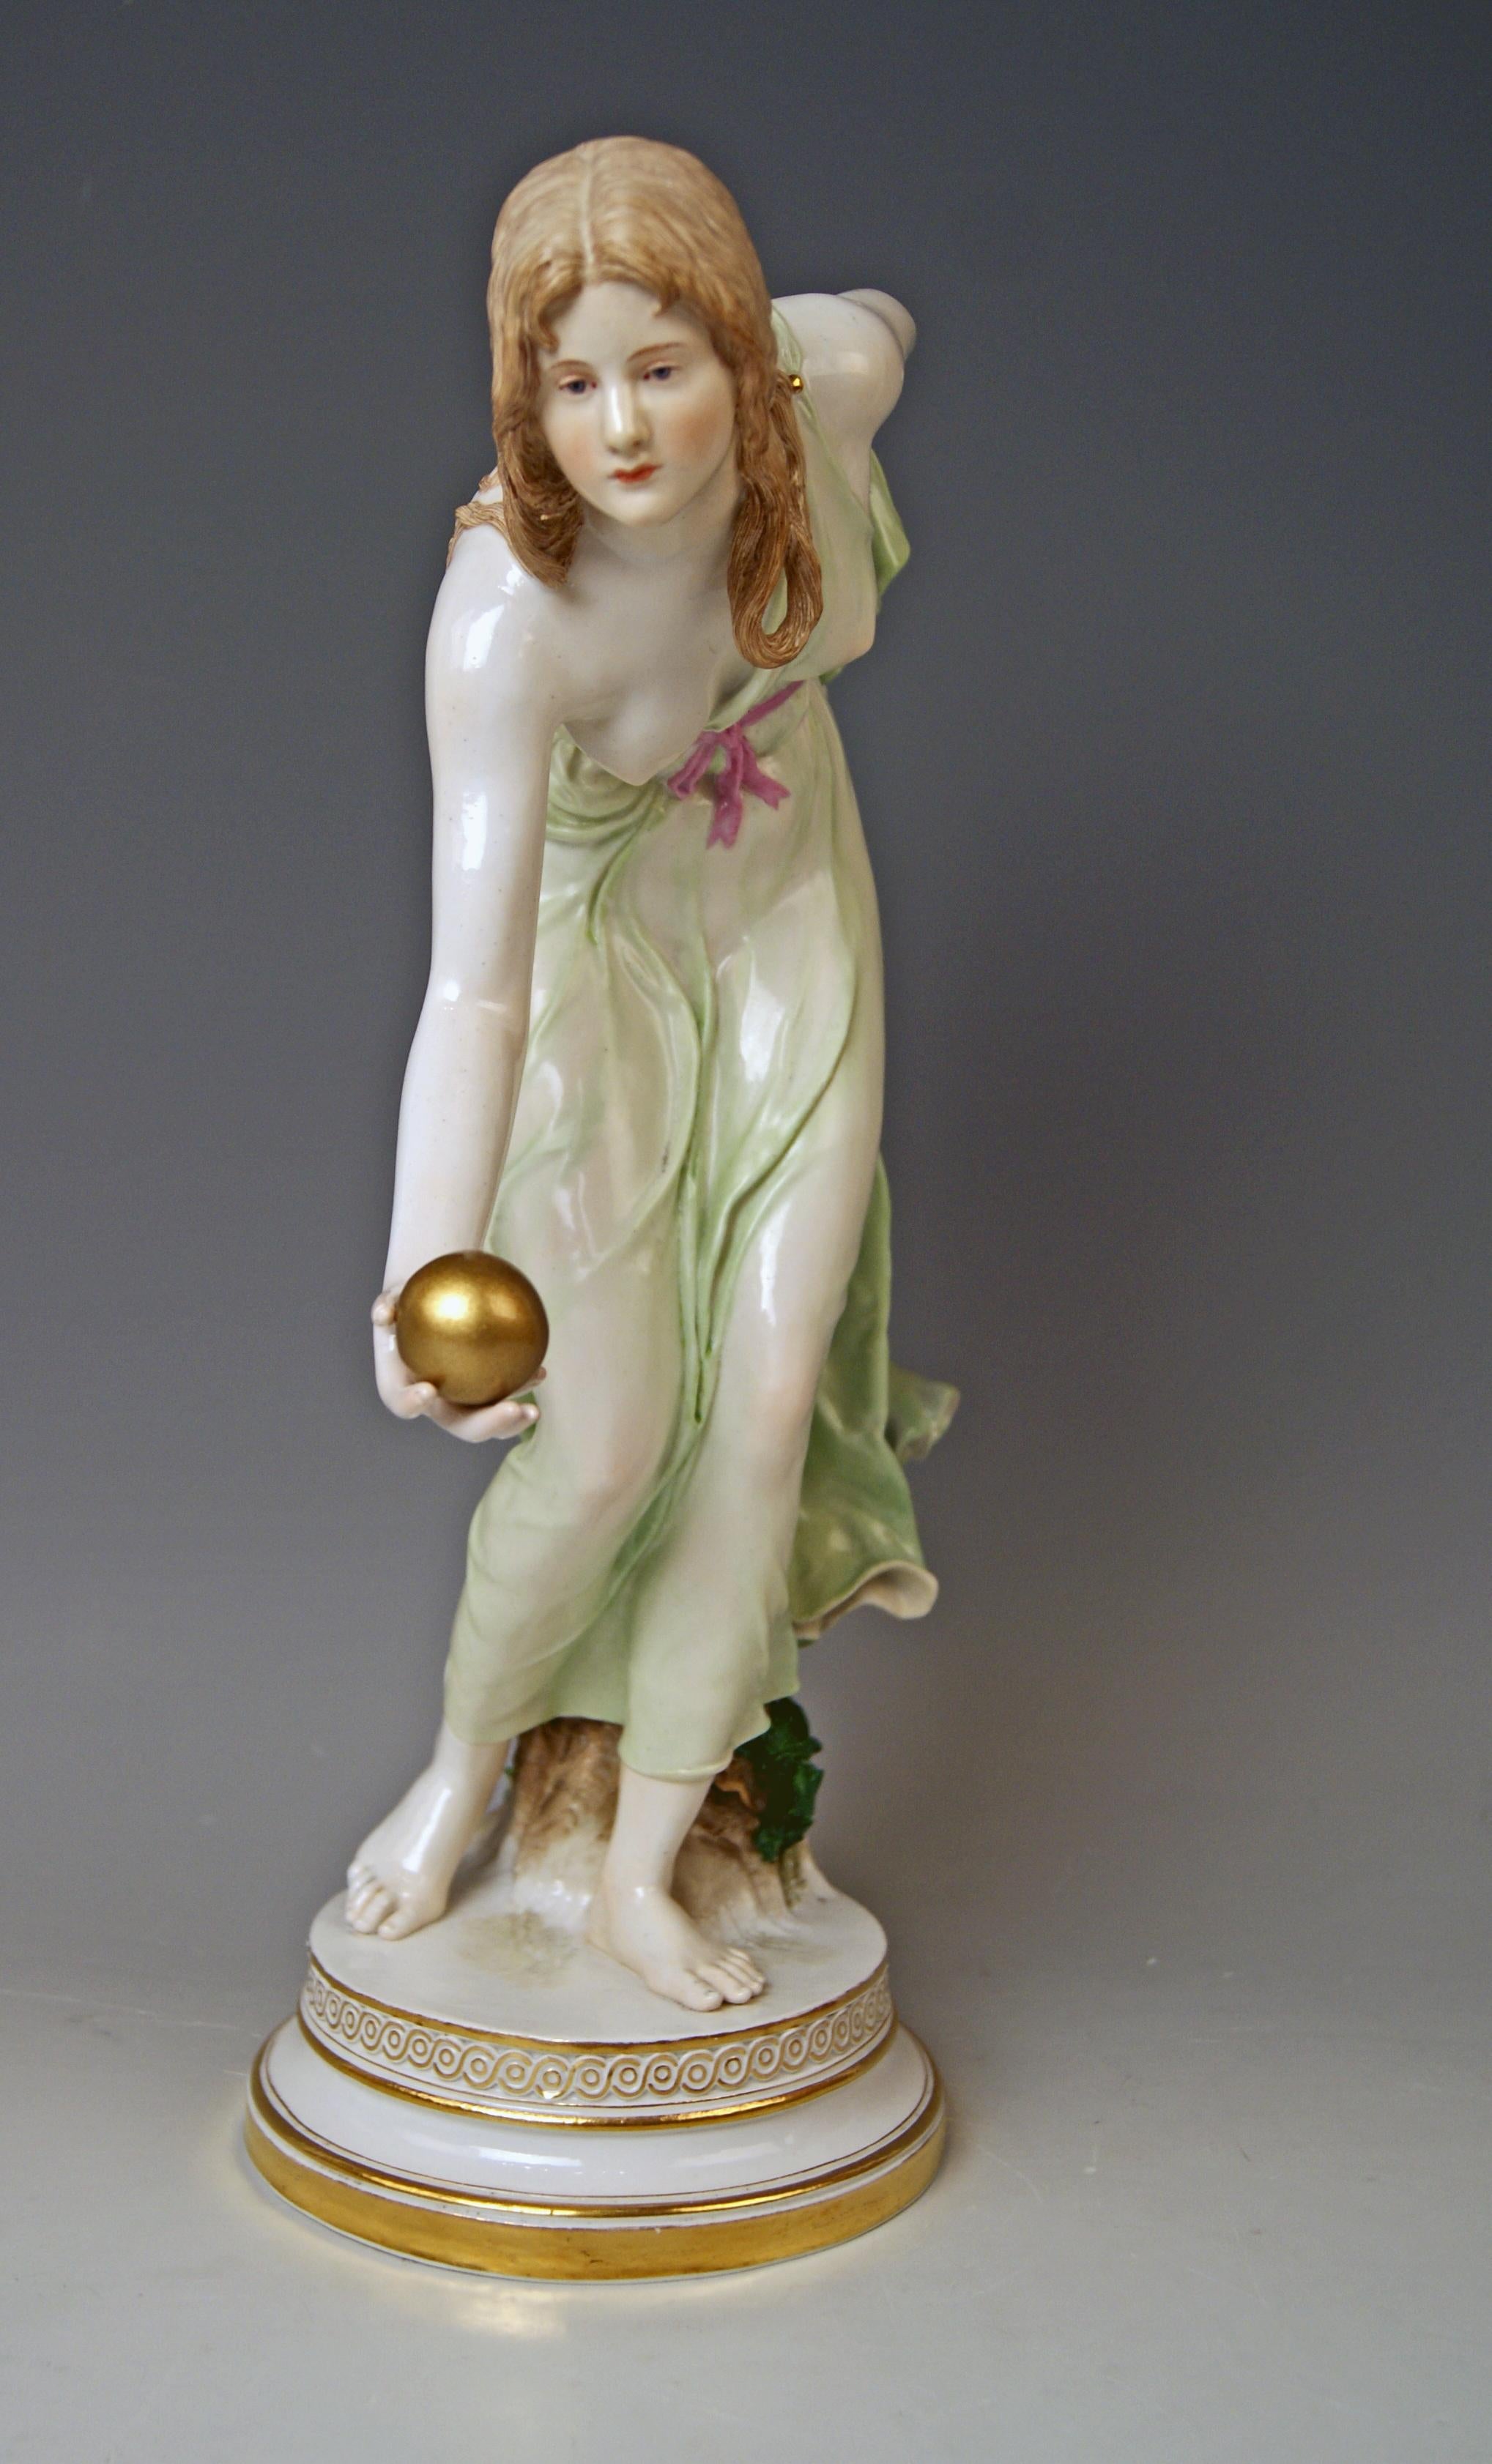 Early 20th Century Meissen Art Nouveau Girl Playing Bowls by Walter Schott, circa 1900